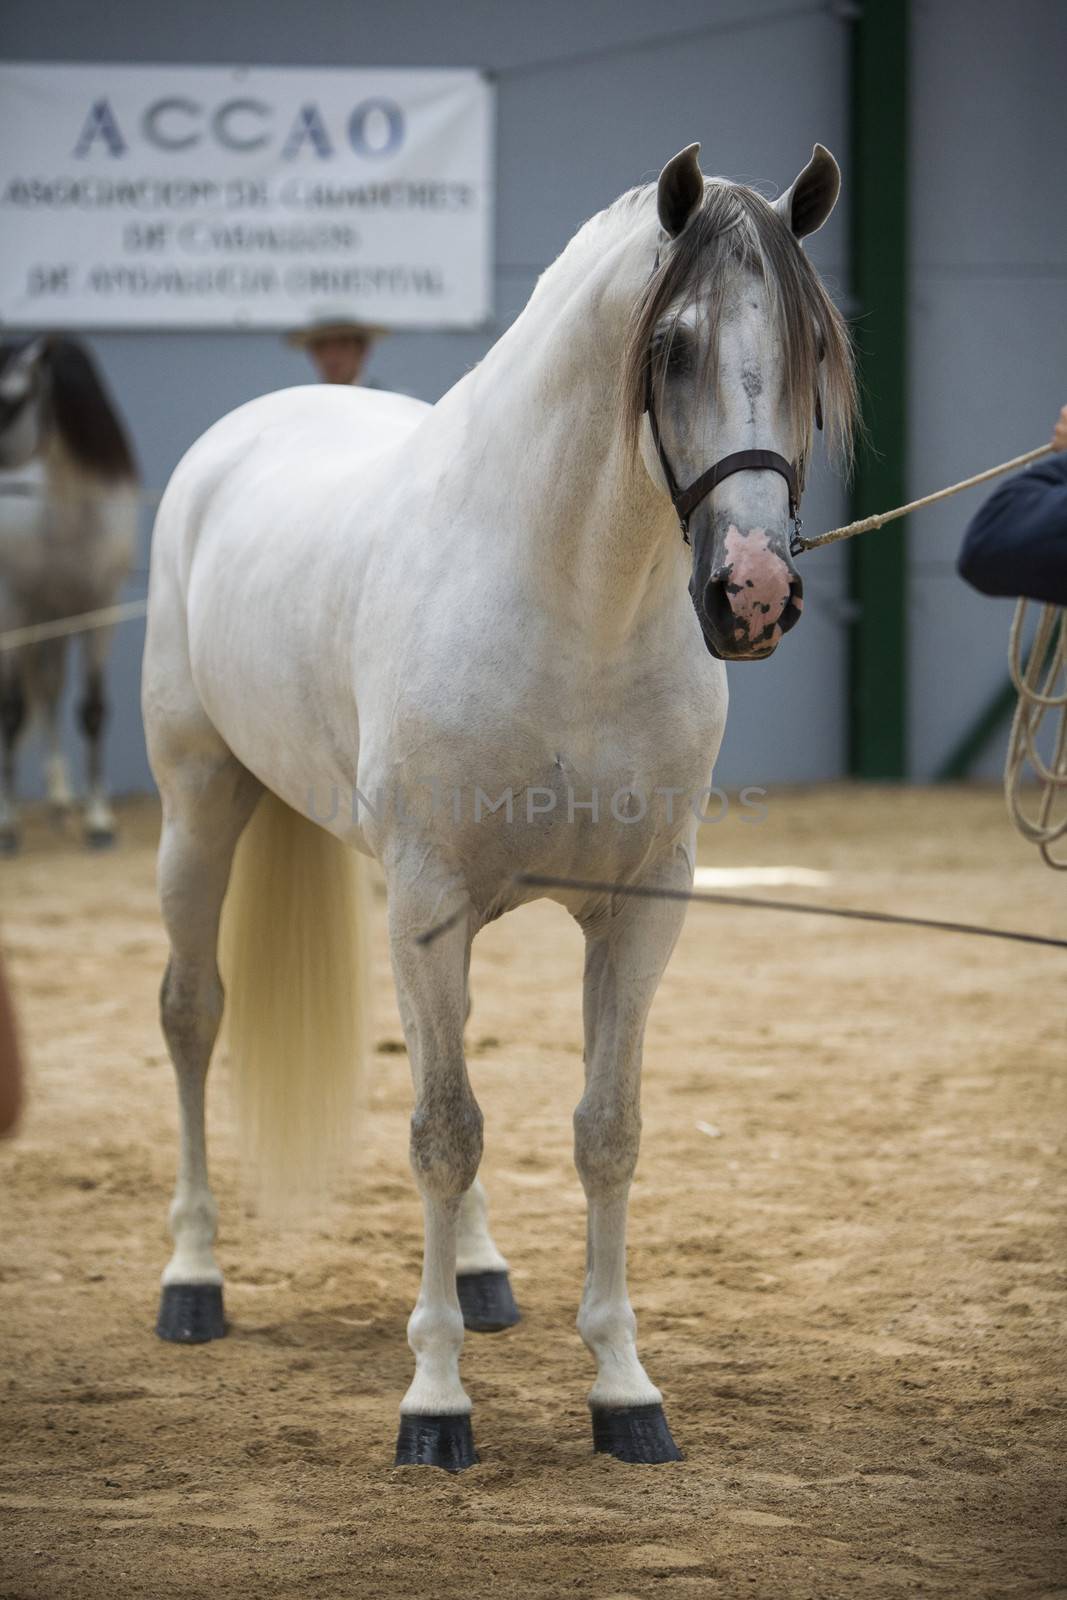 Estepona, Malaga province, SPAIN - 30 august 2009: Spanish horse of pure race taking part during an exercise of equestrian morphology in Baza, Granada province, Andalusia, Spain